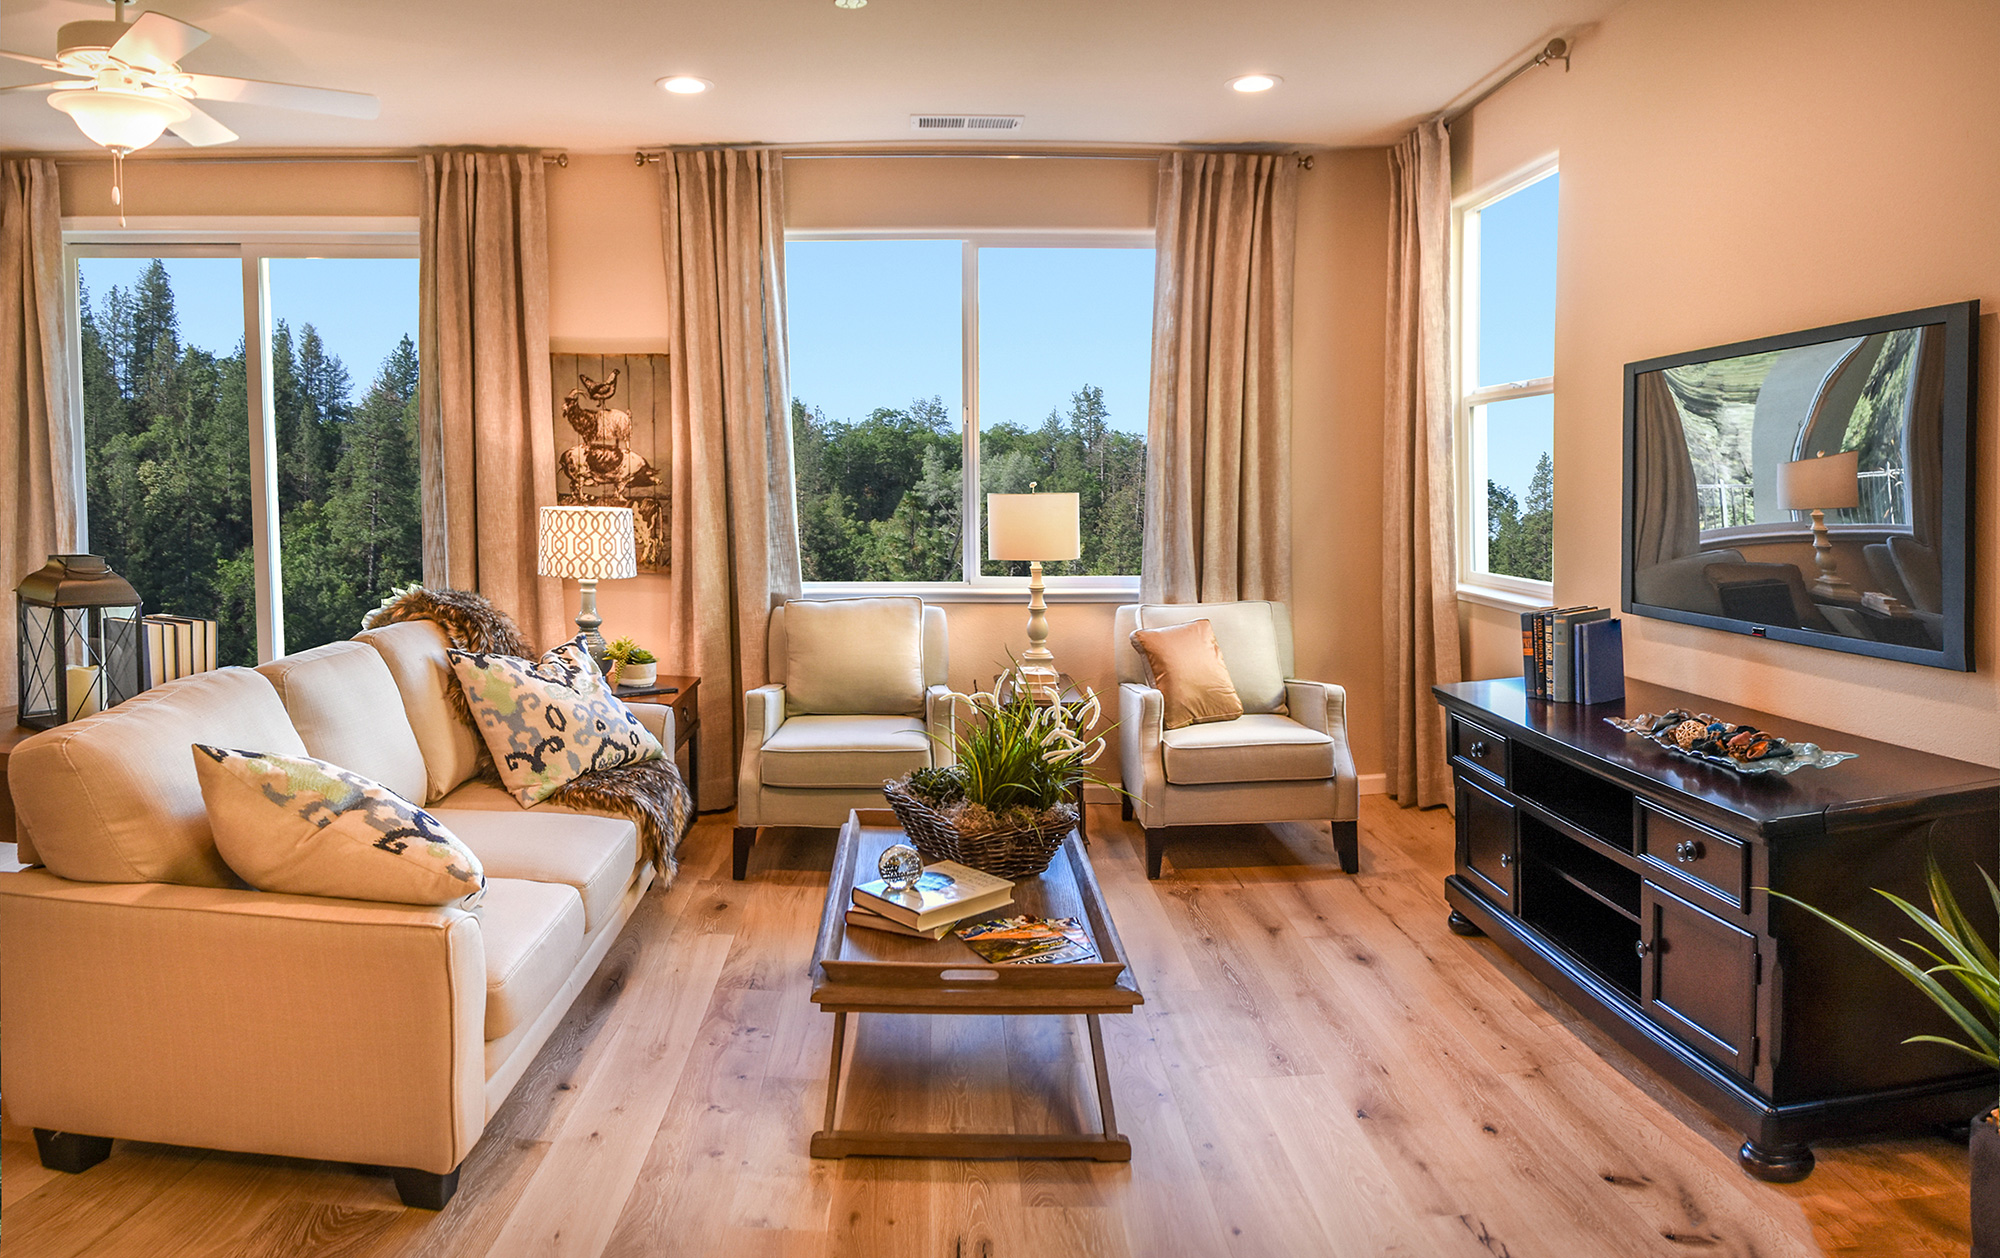 Easy Living with Fun and Friends in Silverado Village Homes